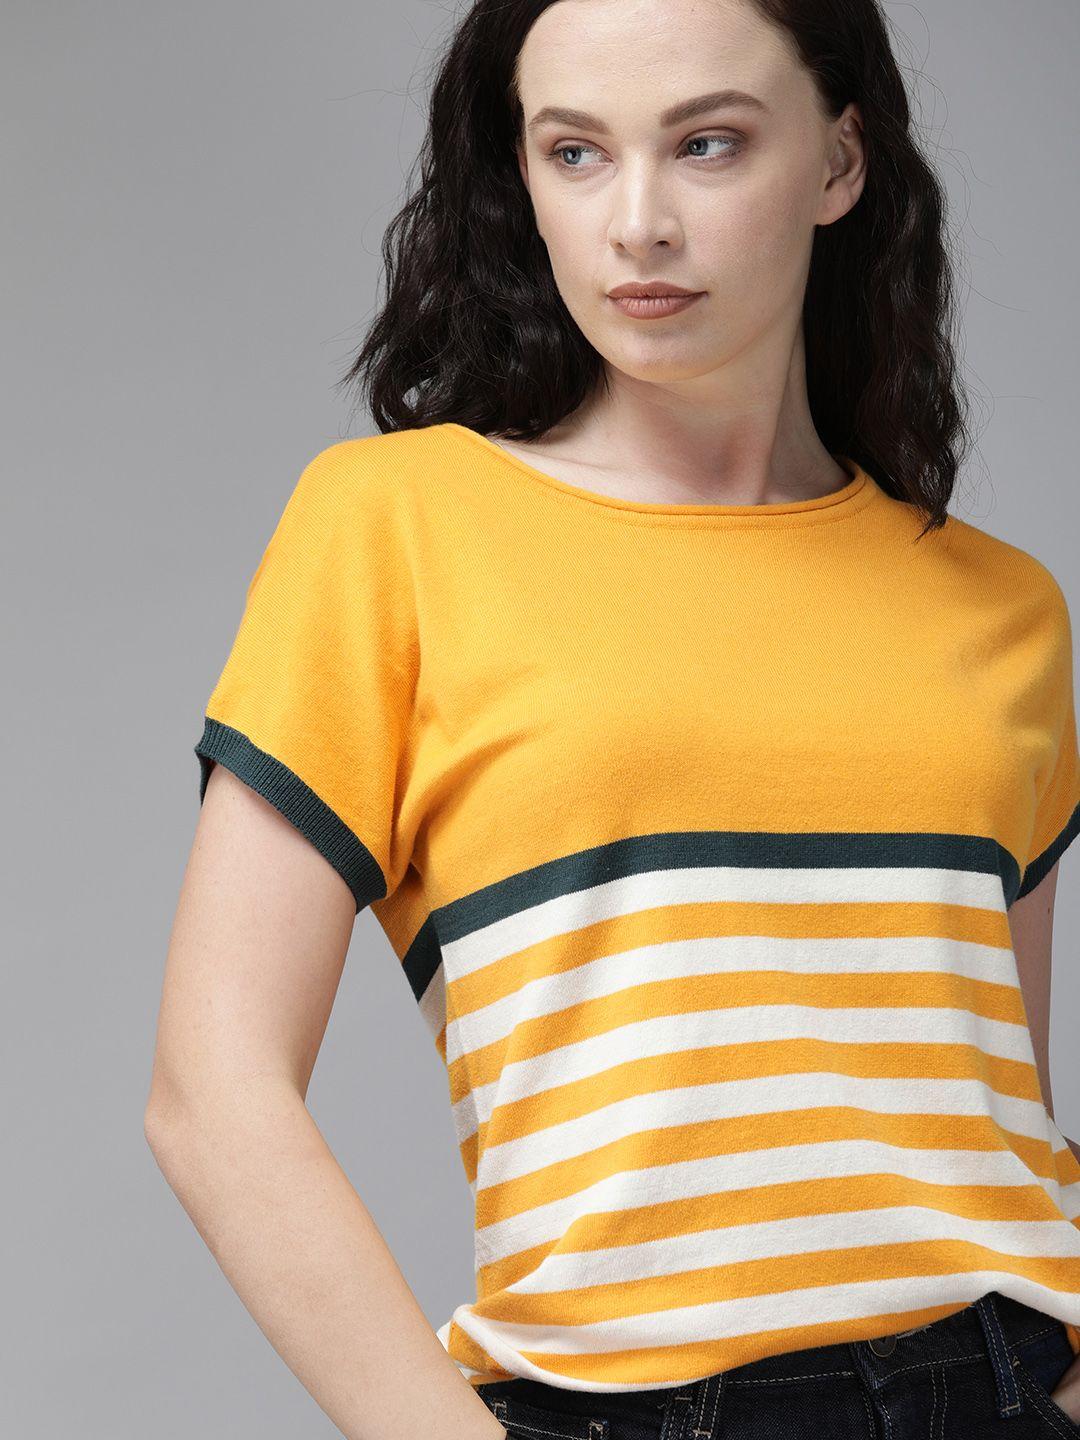 the roadster lifestyle co women yellow & white striped regular top